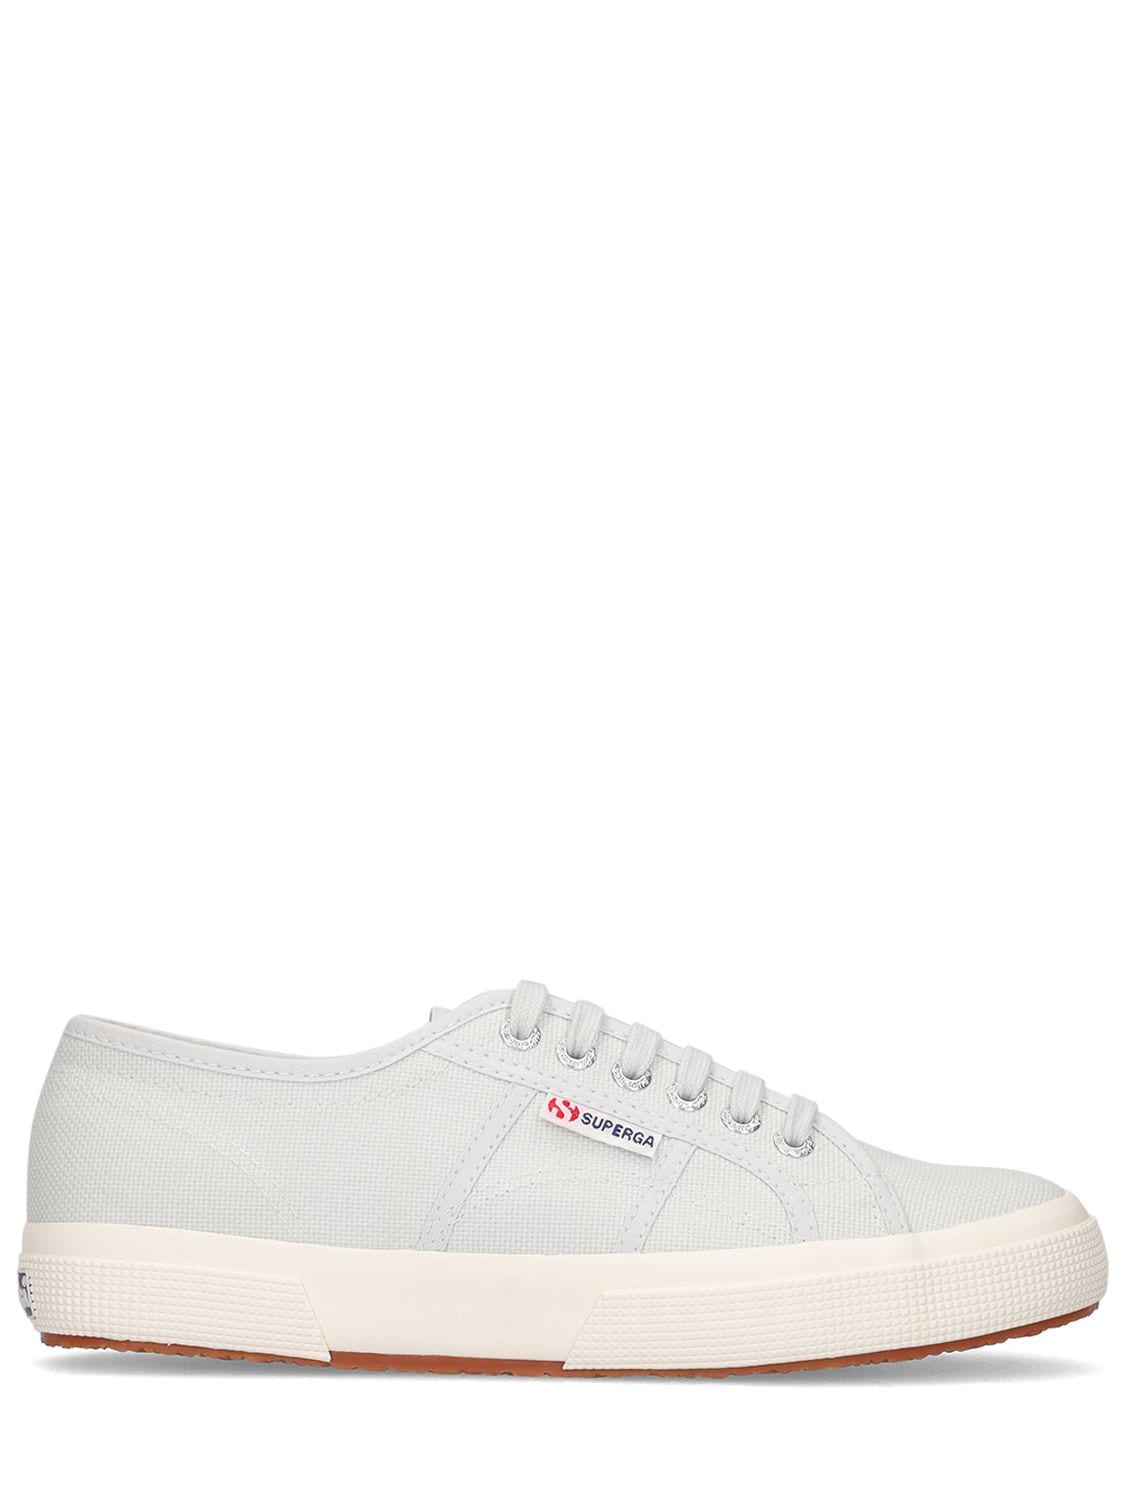 Superga Logo Canvas Sneakers In Light Blue